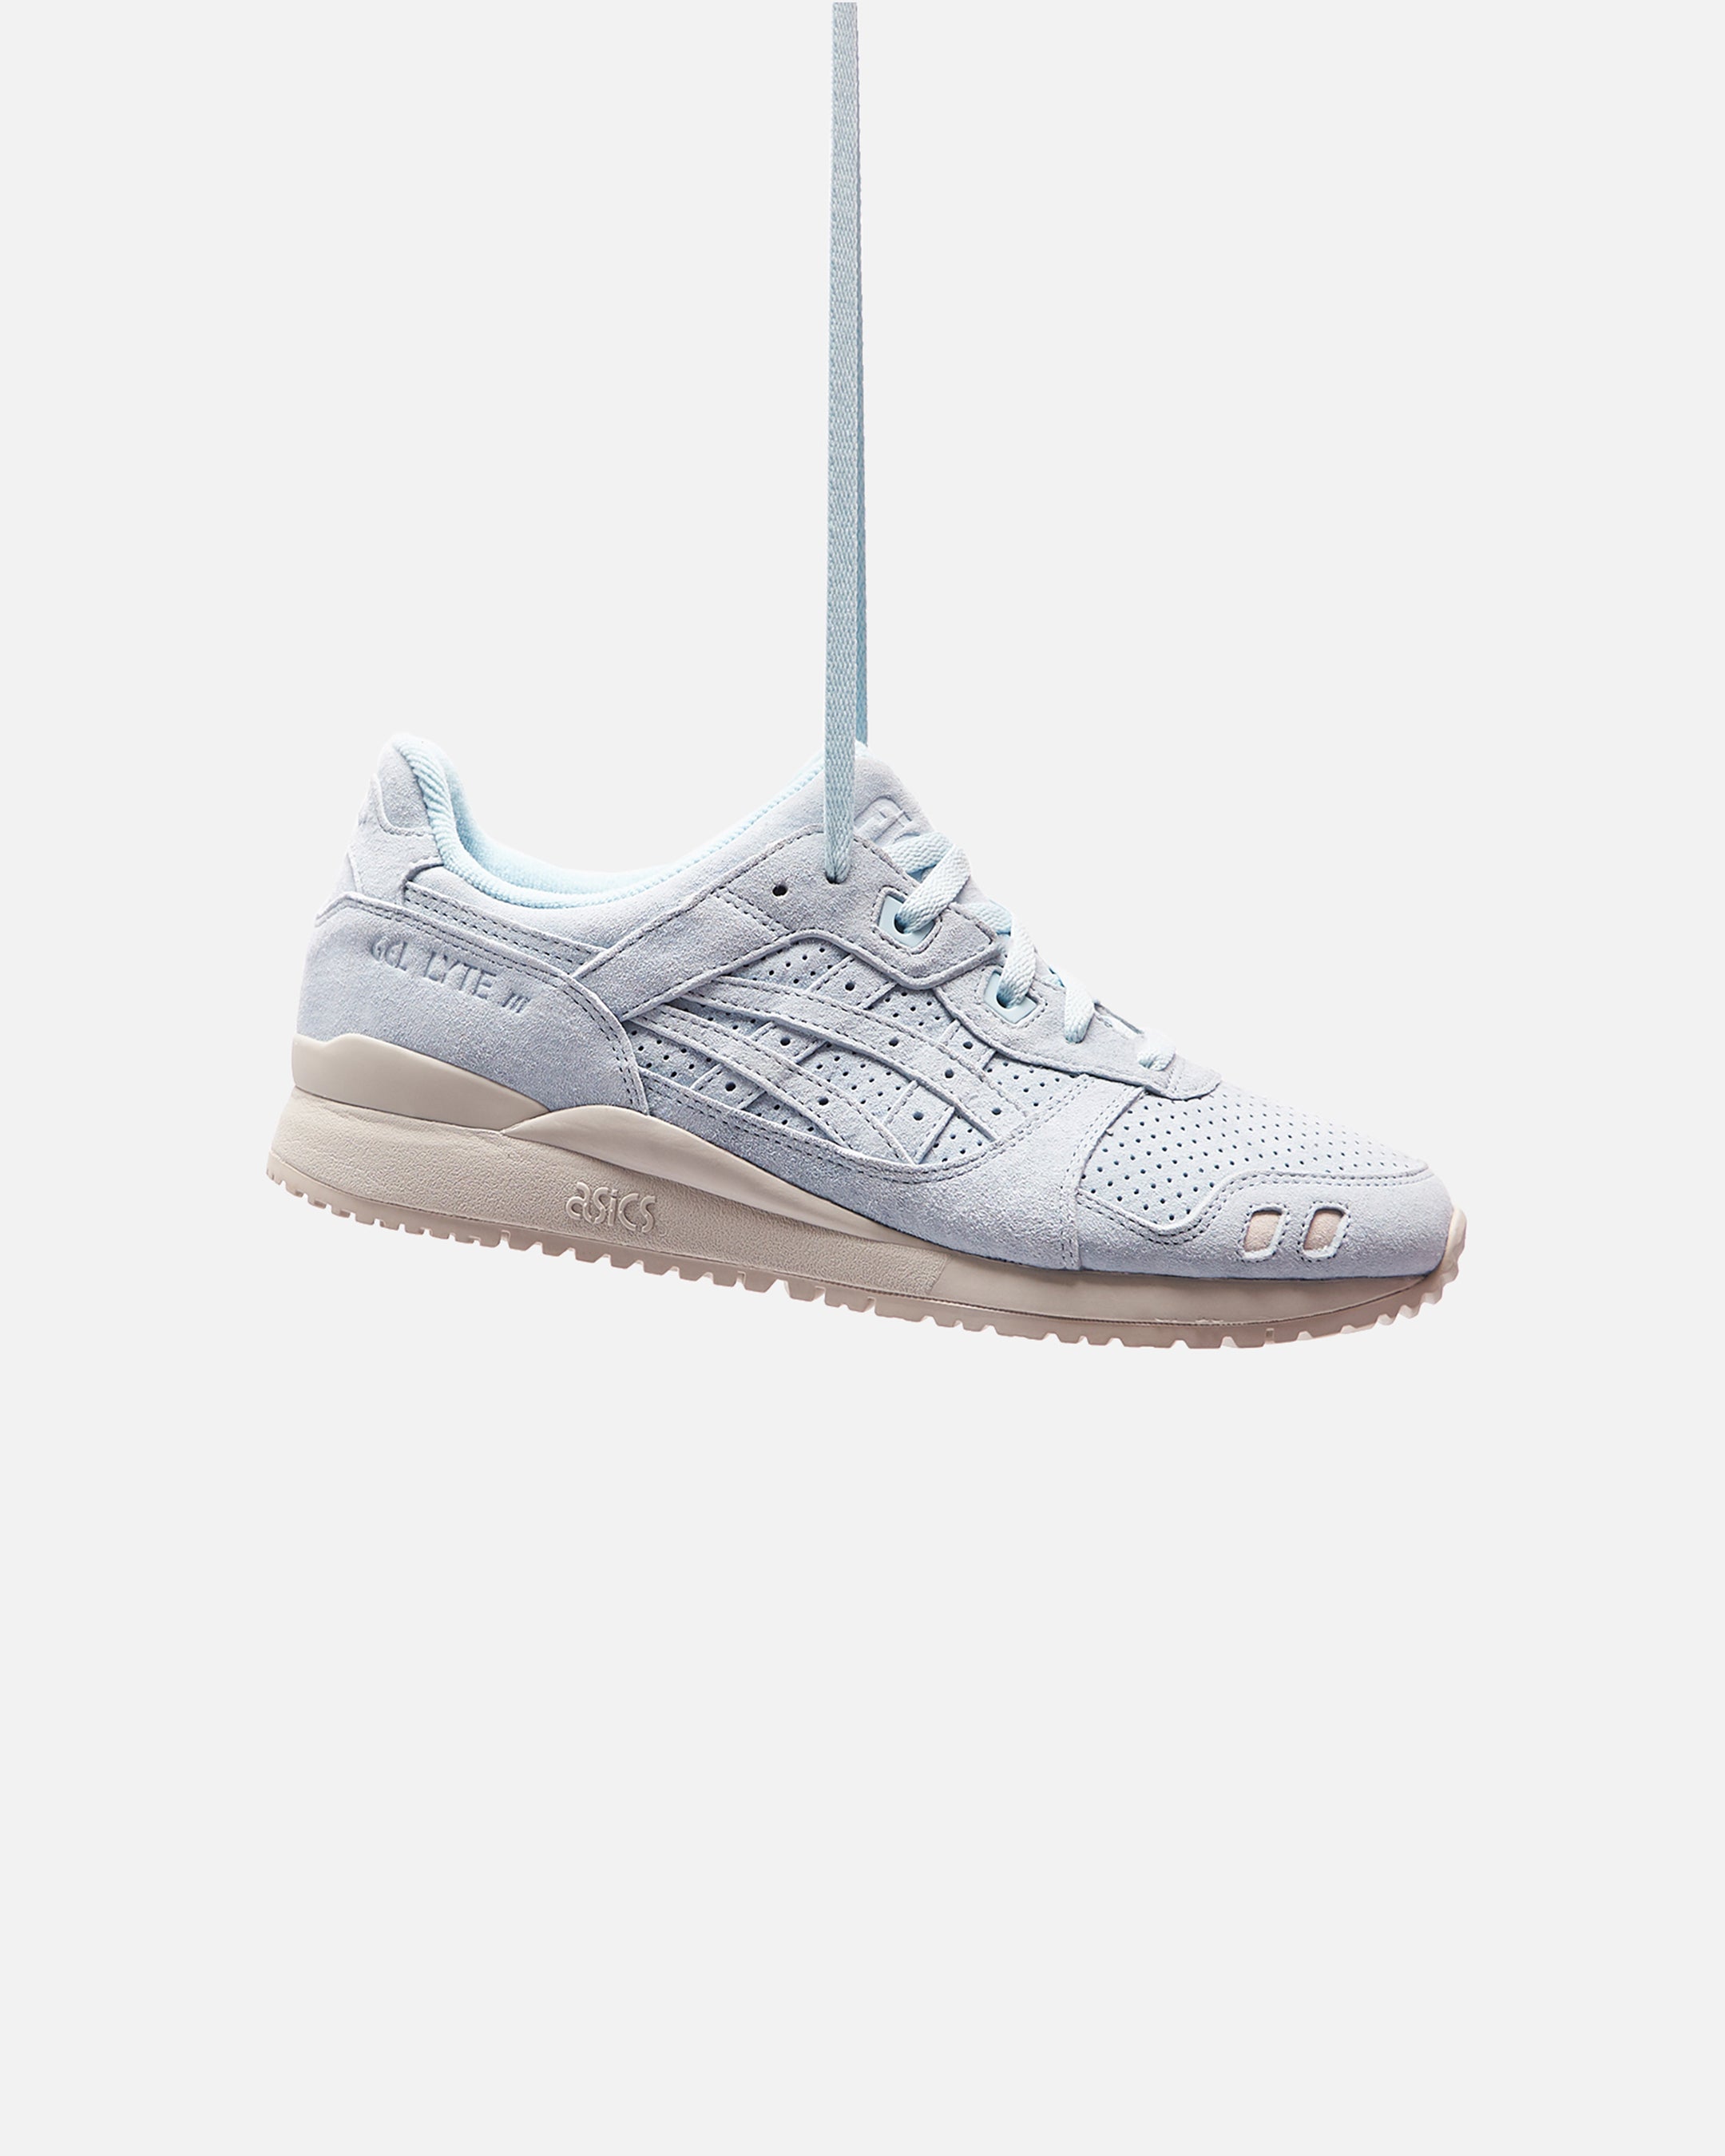 Ronnie Fieg for Asics Gel-Lyte III - The Palette – Kith